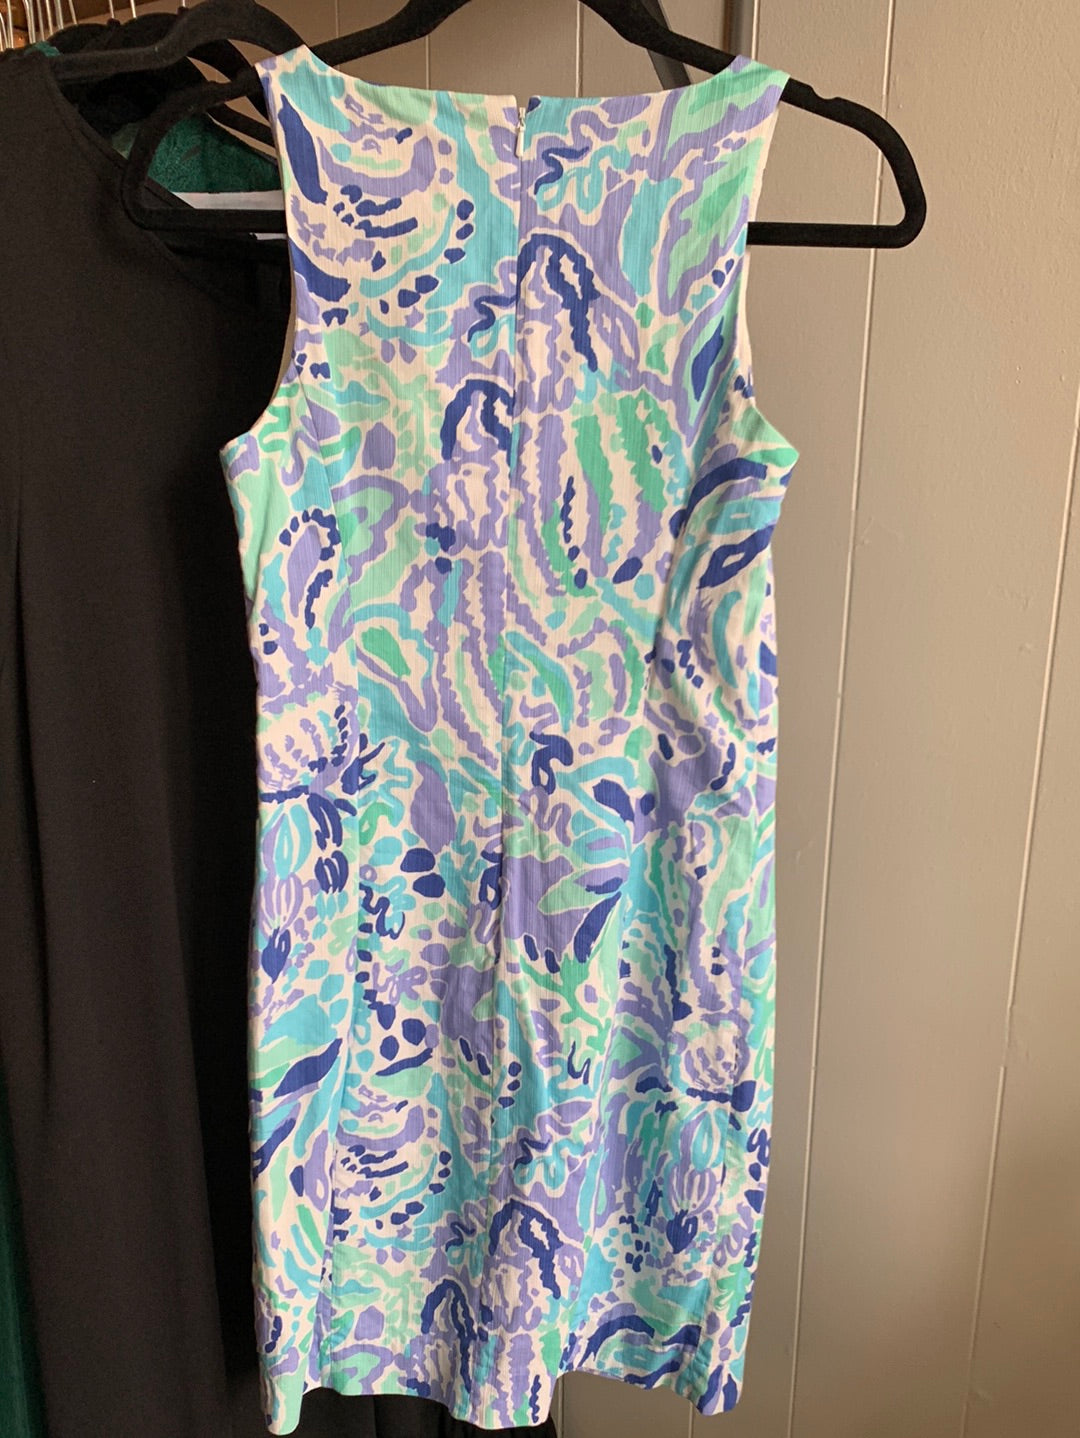 Blue and Teal Lilly Pulitzer Dress, size 00